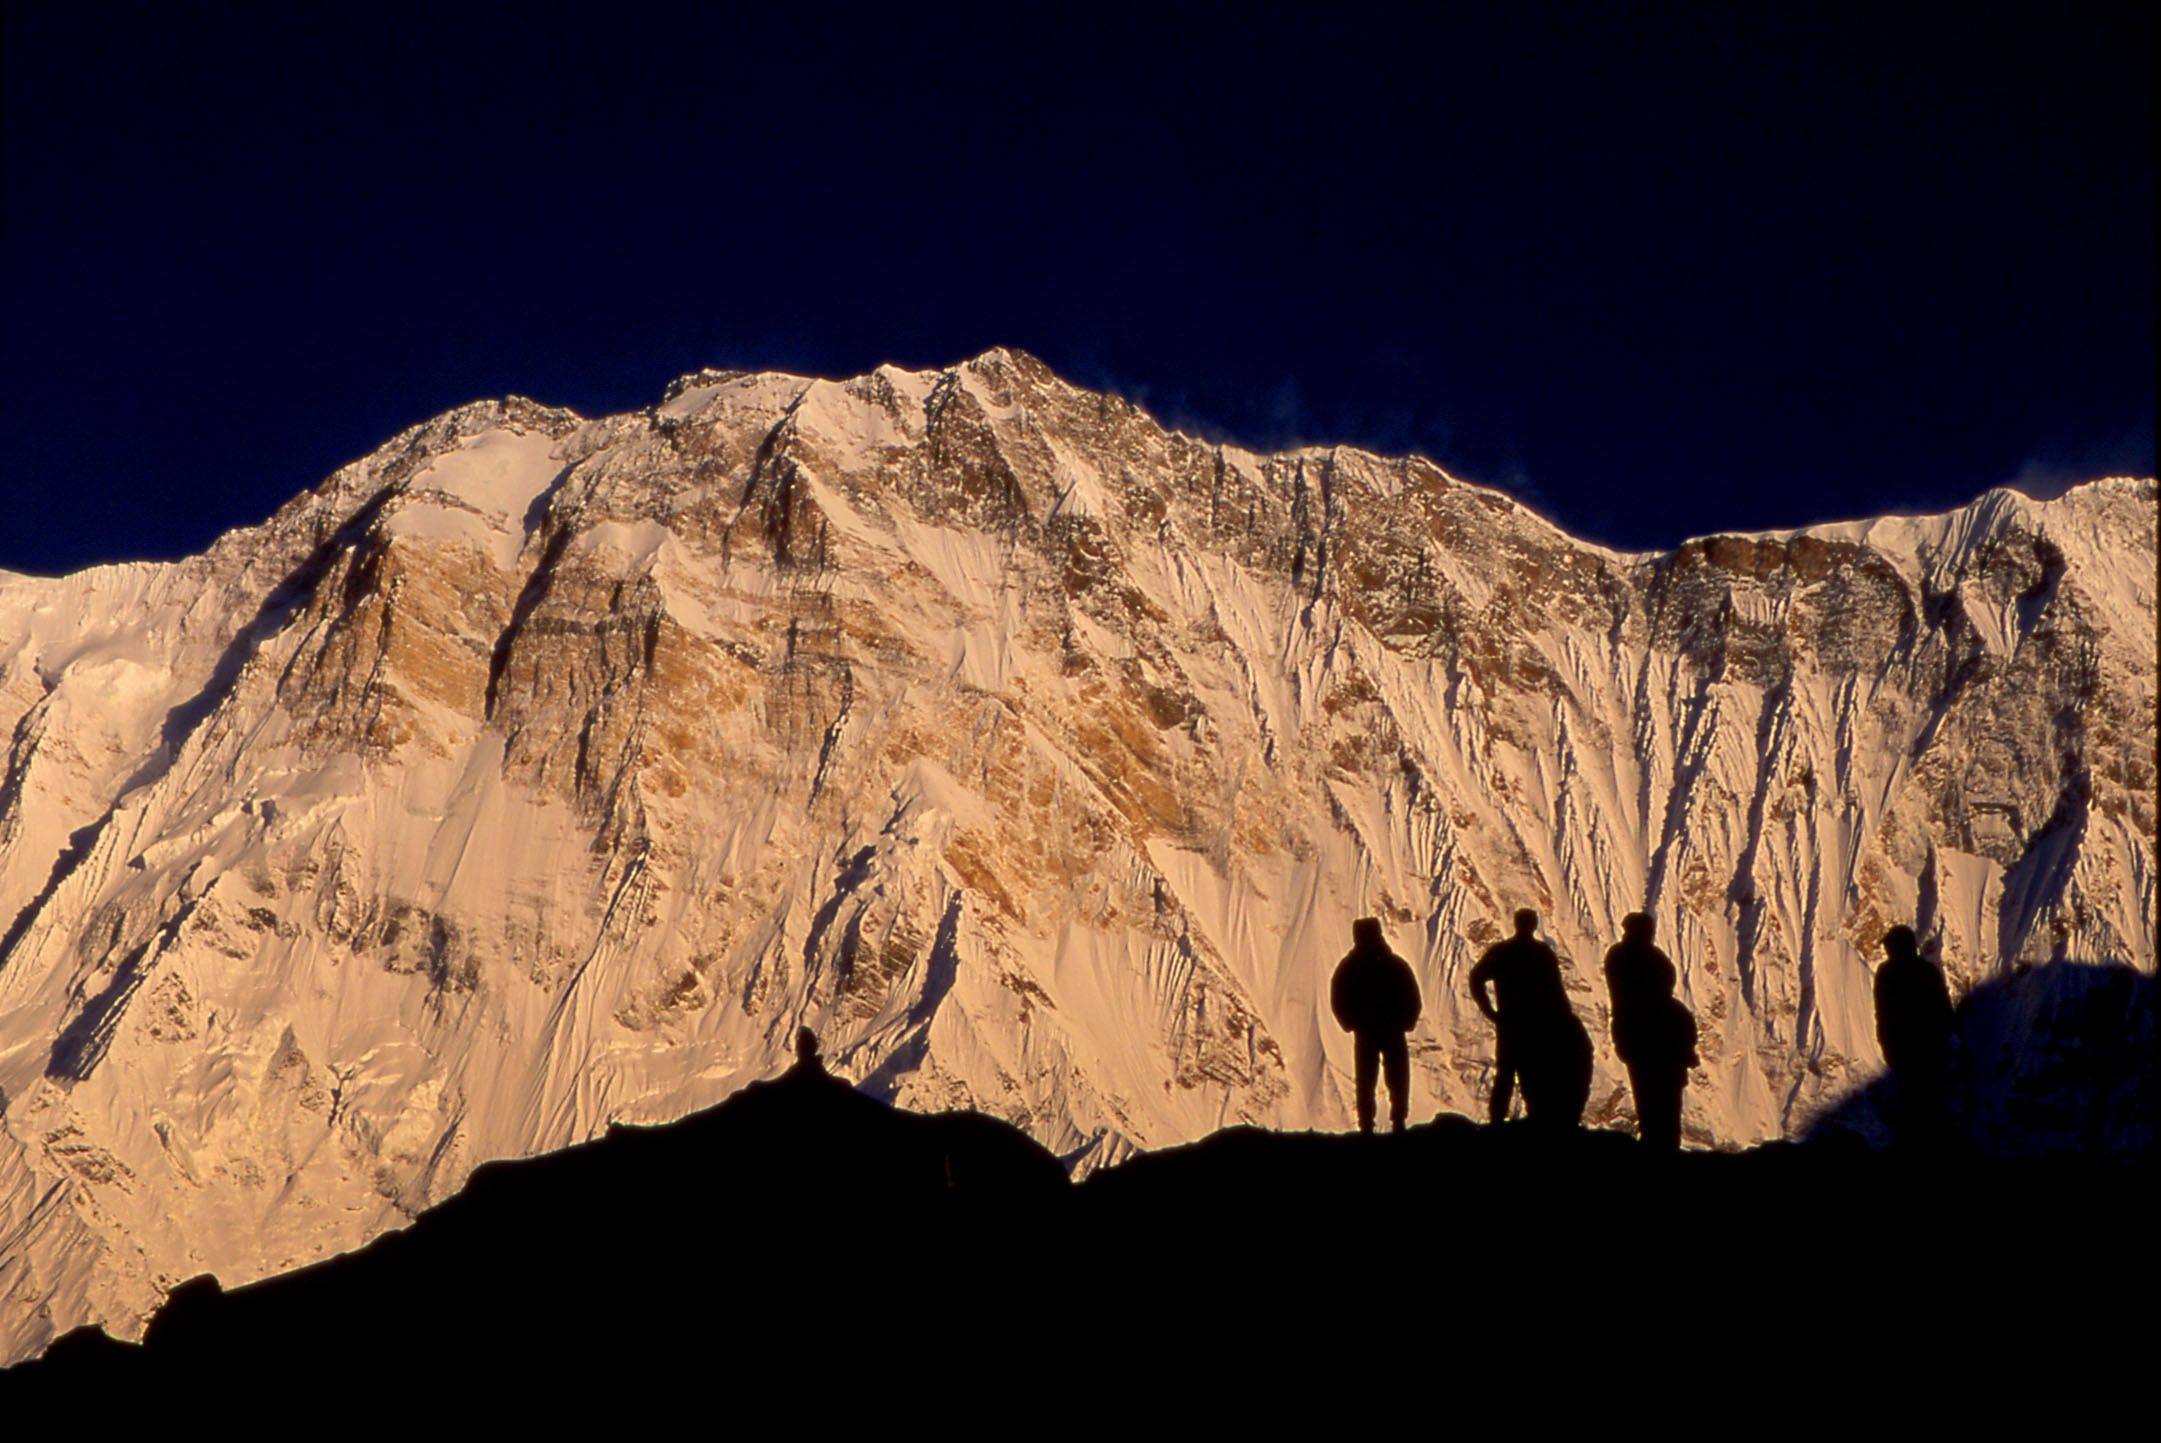 003 Annapurna I from ABC just after sunrise..jpg